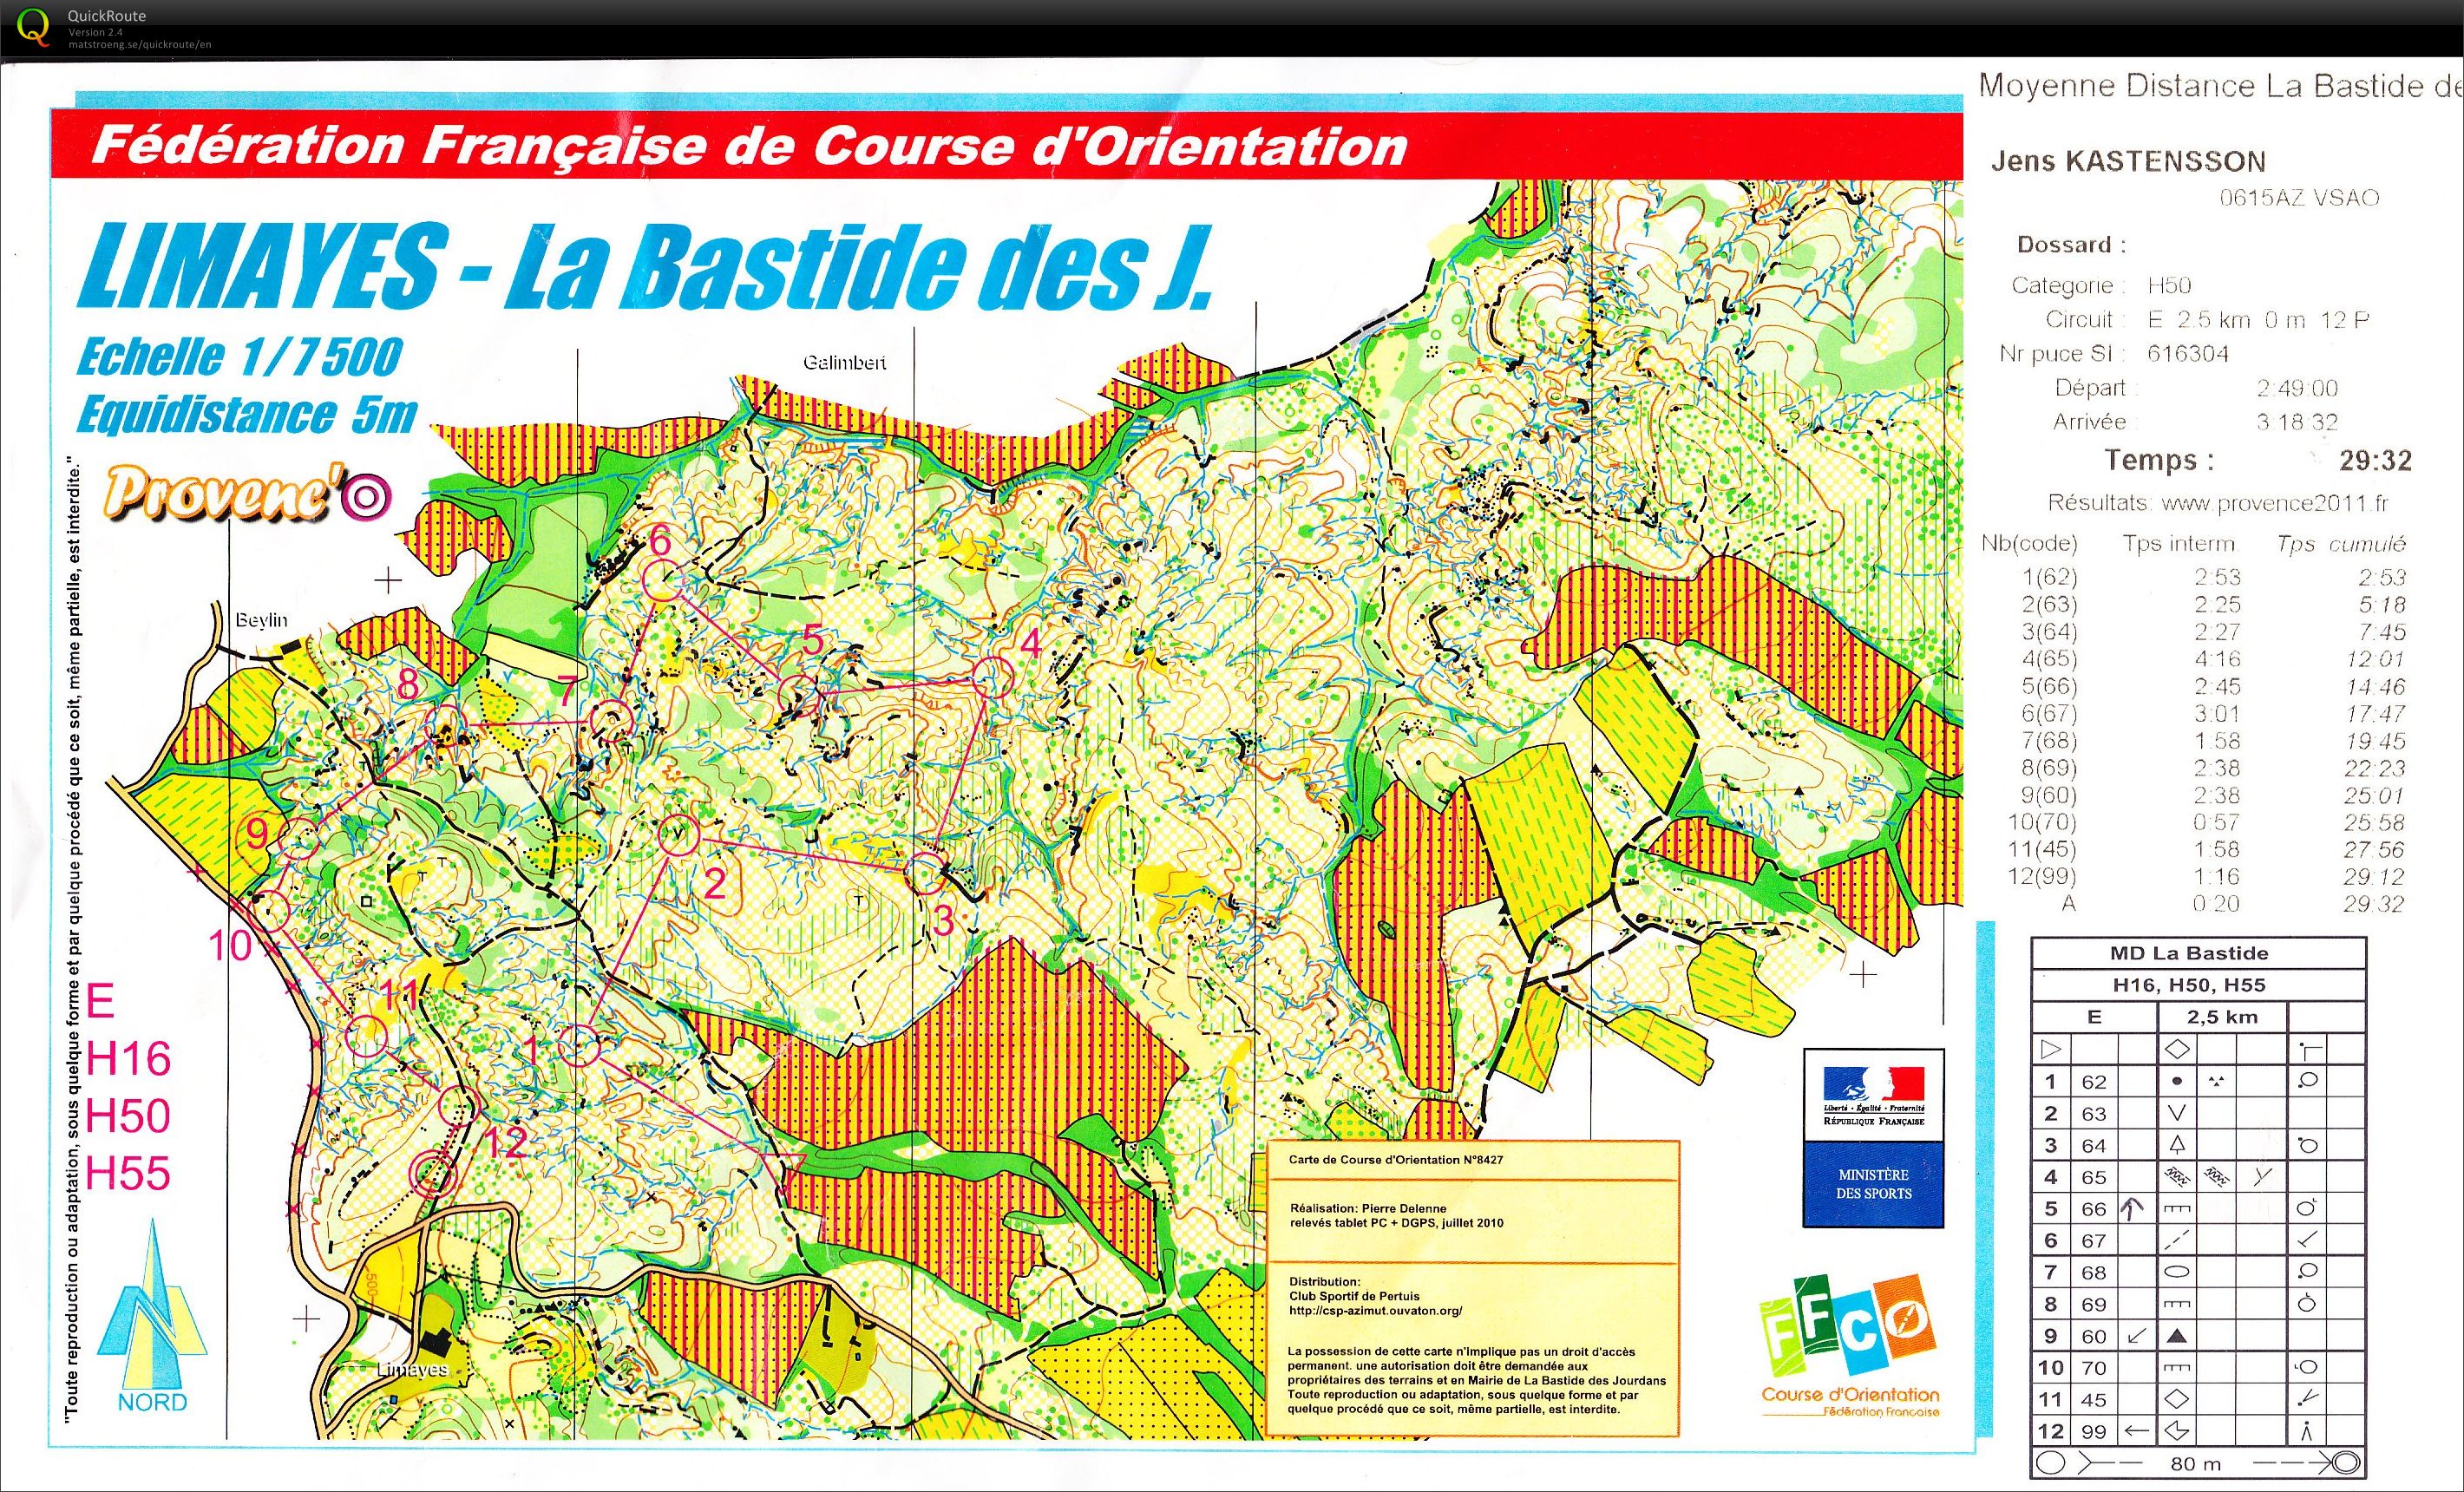 Nationale south-east Day 1 - Middle - H50 (2012-05-19)